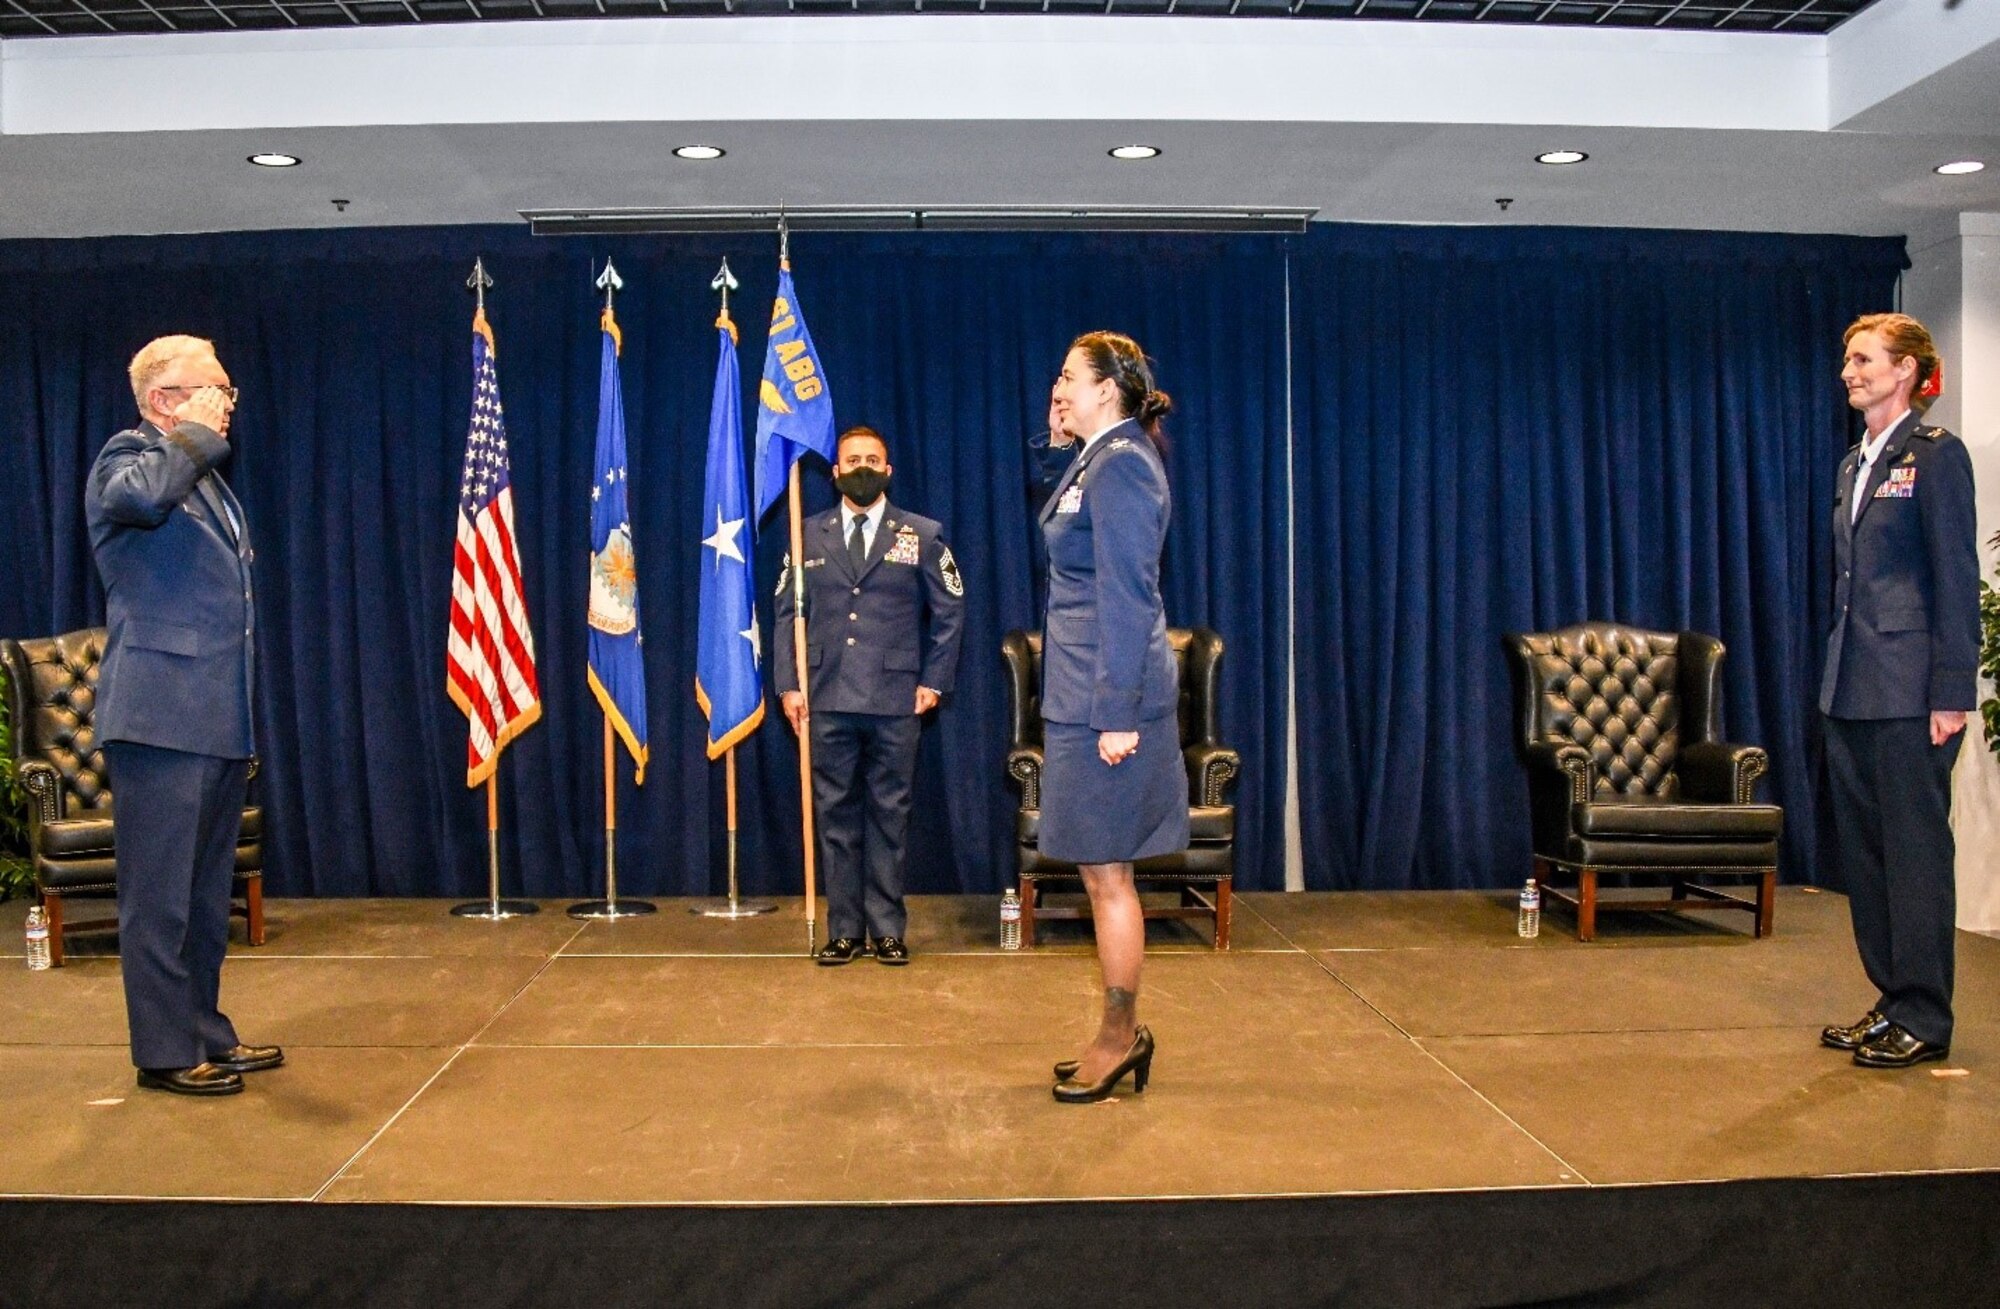 Lt. Gen. John F. Thompson, Space and Missile Systems Center commander and Air Force program executive officer for Space, officiates a change of command during which outgoing commander, Col. Ann Igl relinquishes leadership of the 61st Air Base Group to Col. Becky Beers inside SMC's Gordon Conference Center July 15, 2020 at the Los Angeles Air Force Base in El Segundo, Calif.  (U.S. Air Force photo/Van De Ha)